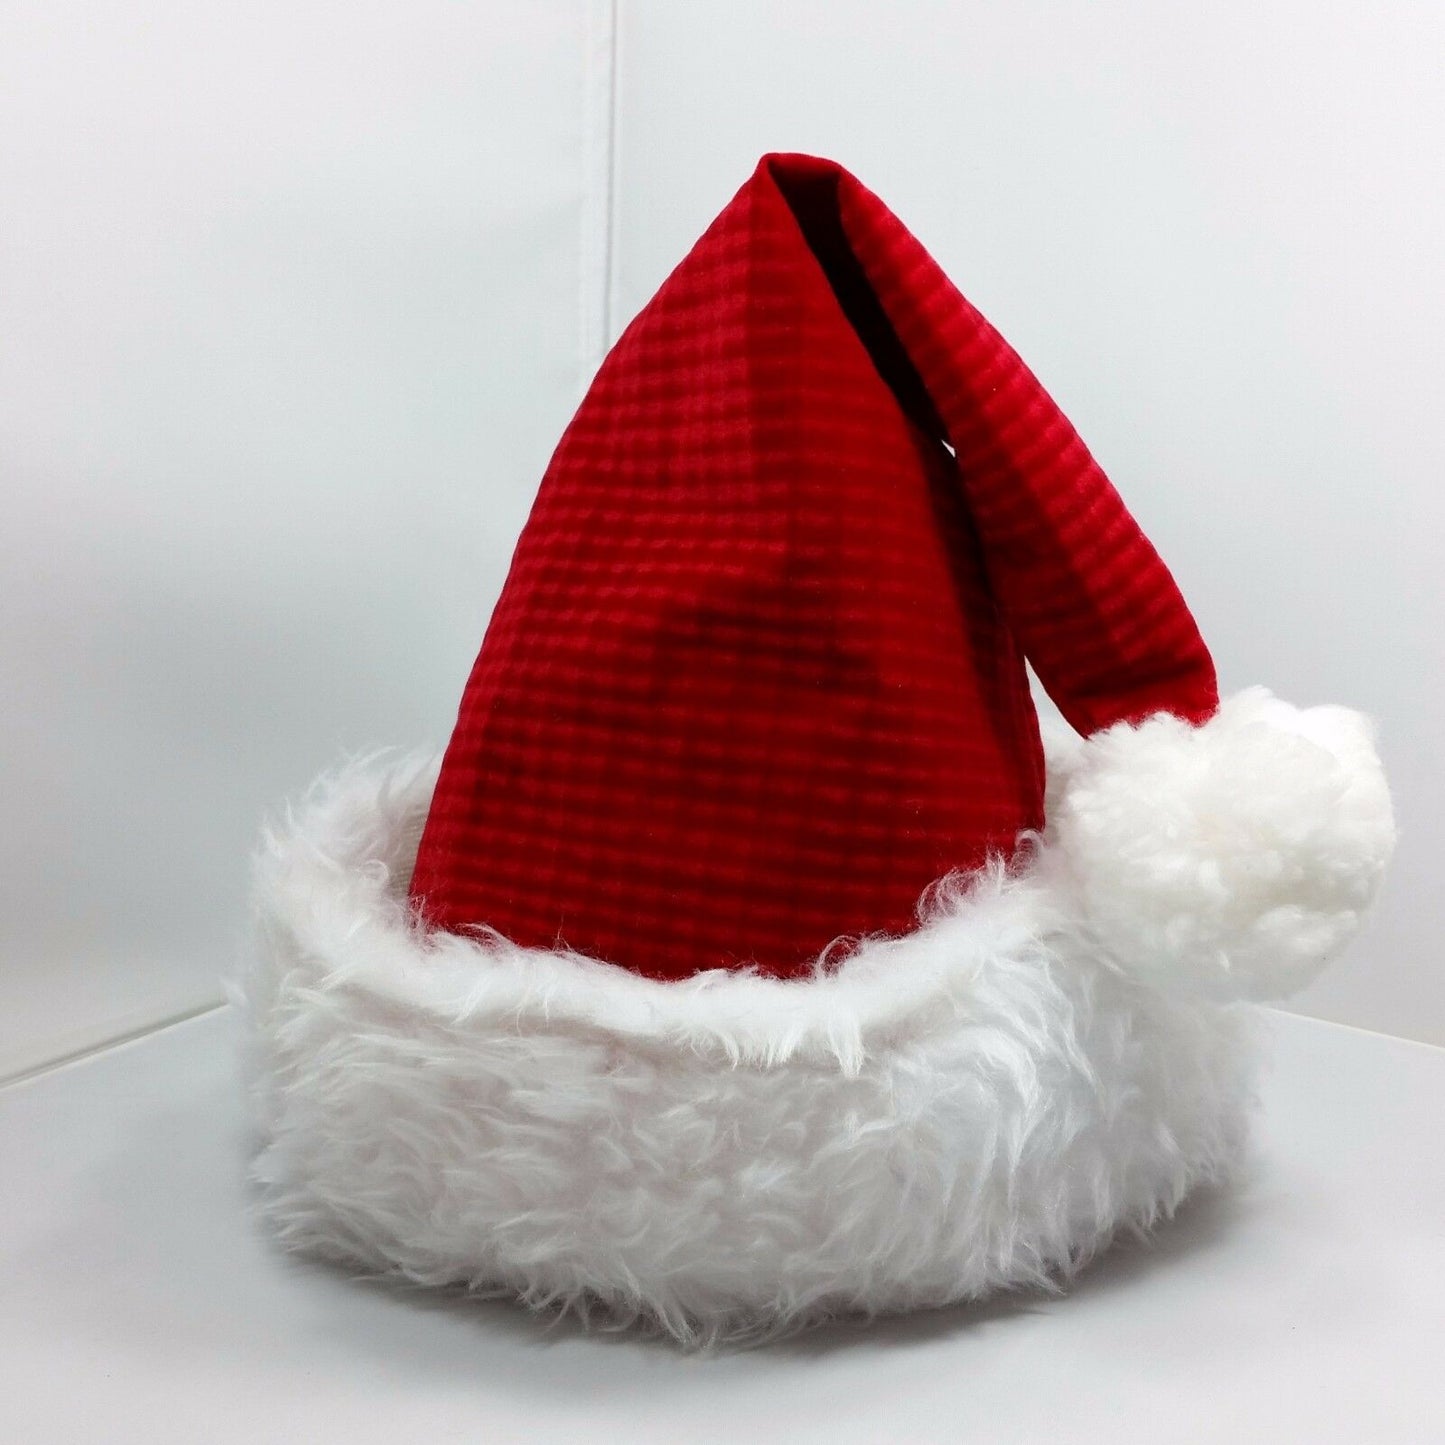 Santa Claus Christmas Hat Fur Band Textured Velveteen Costume Accessory Red USA - At Grandma's Table